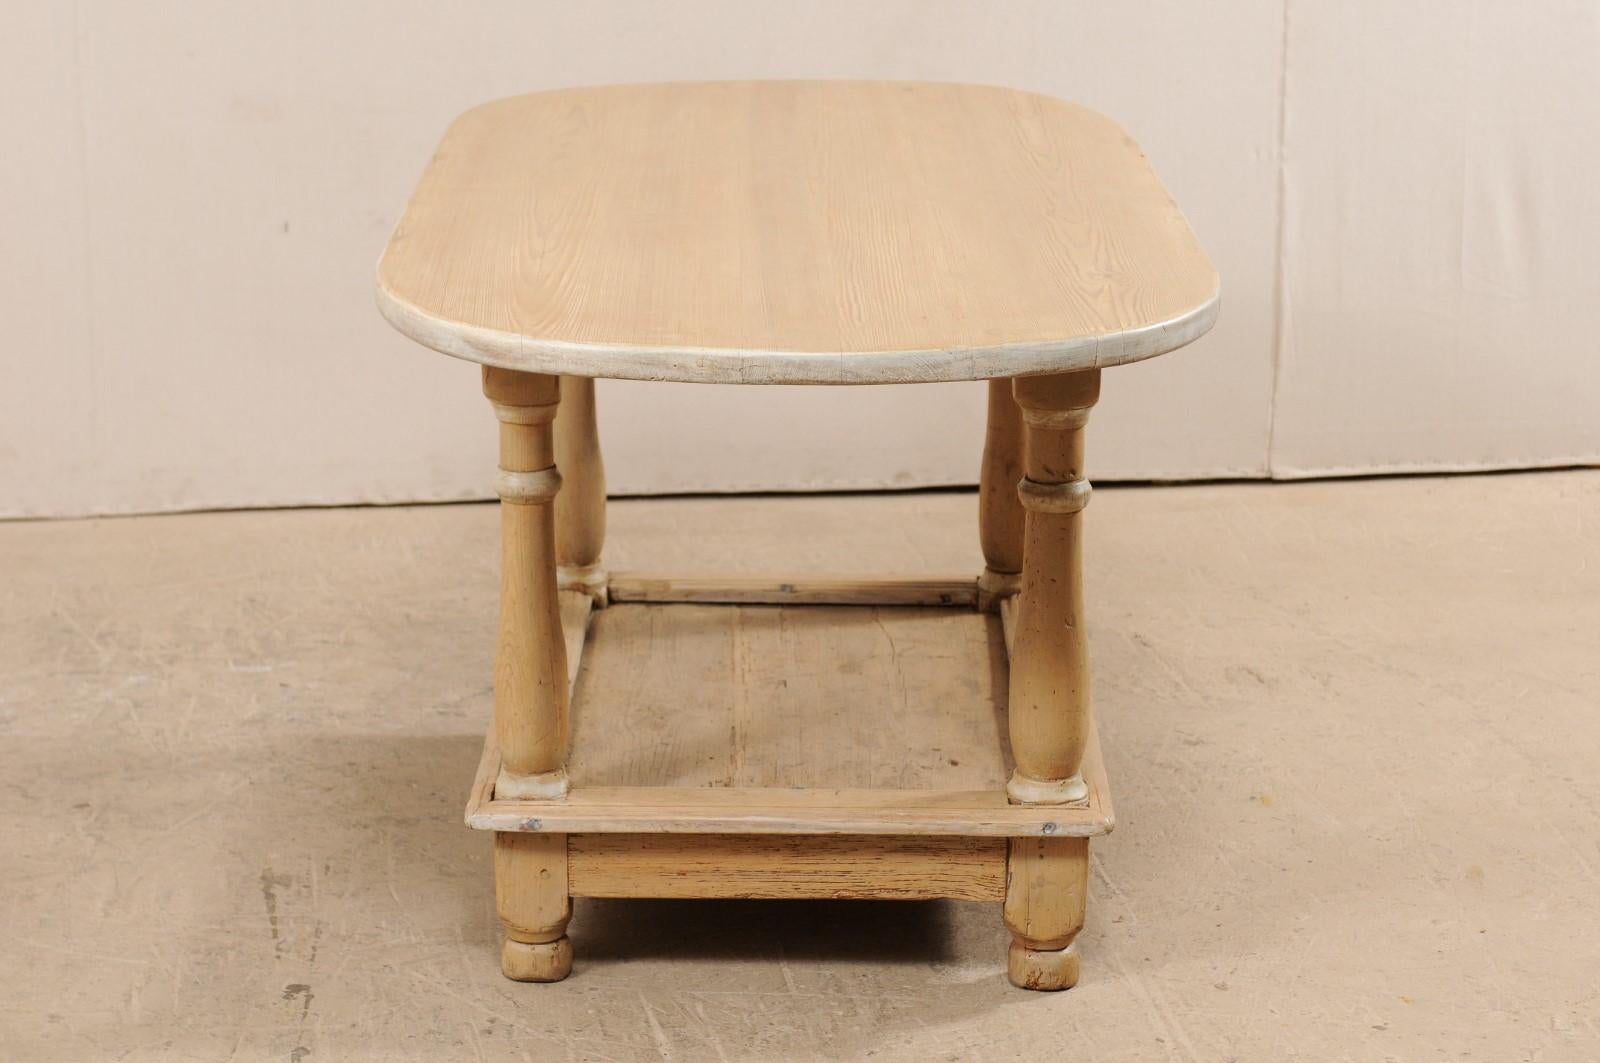 An Early 19th Century Swedish Bleached & Painted Wood Two-Tier Oval Table For Sale 4